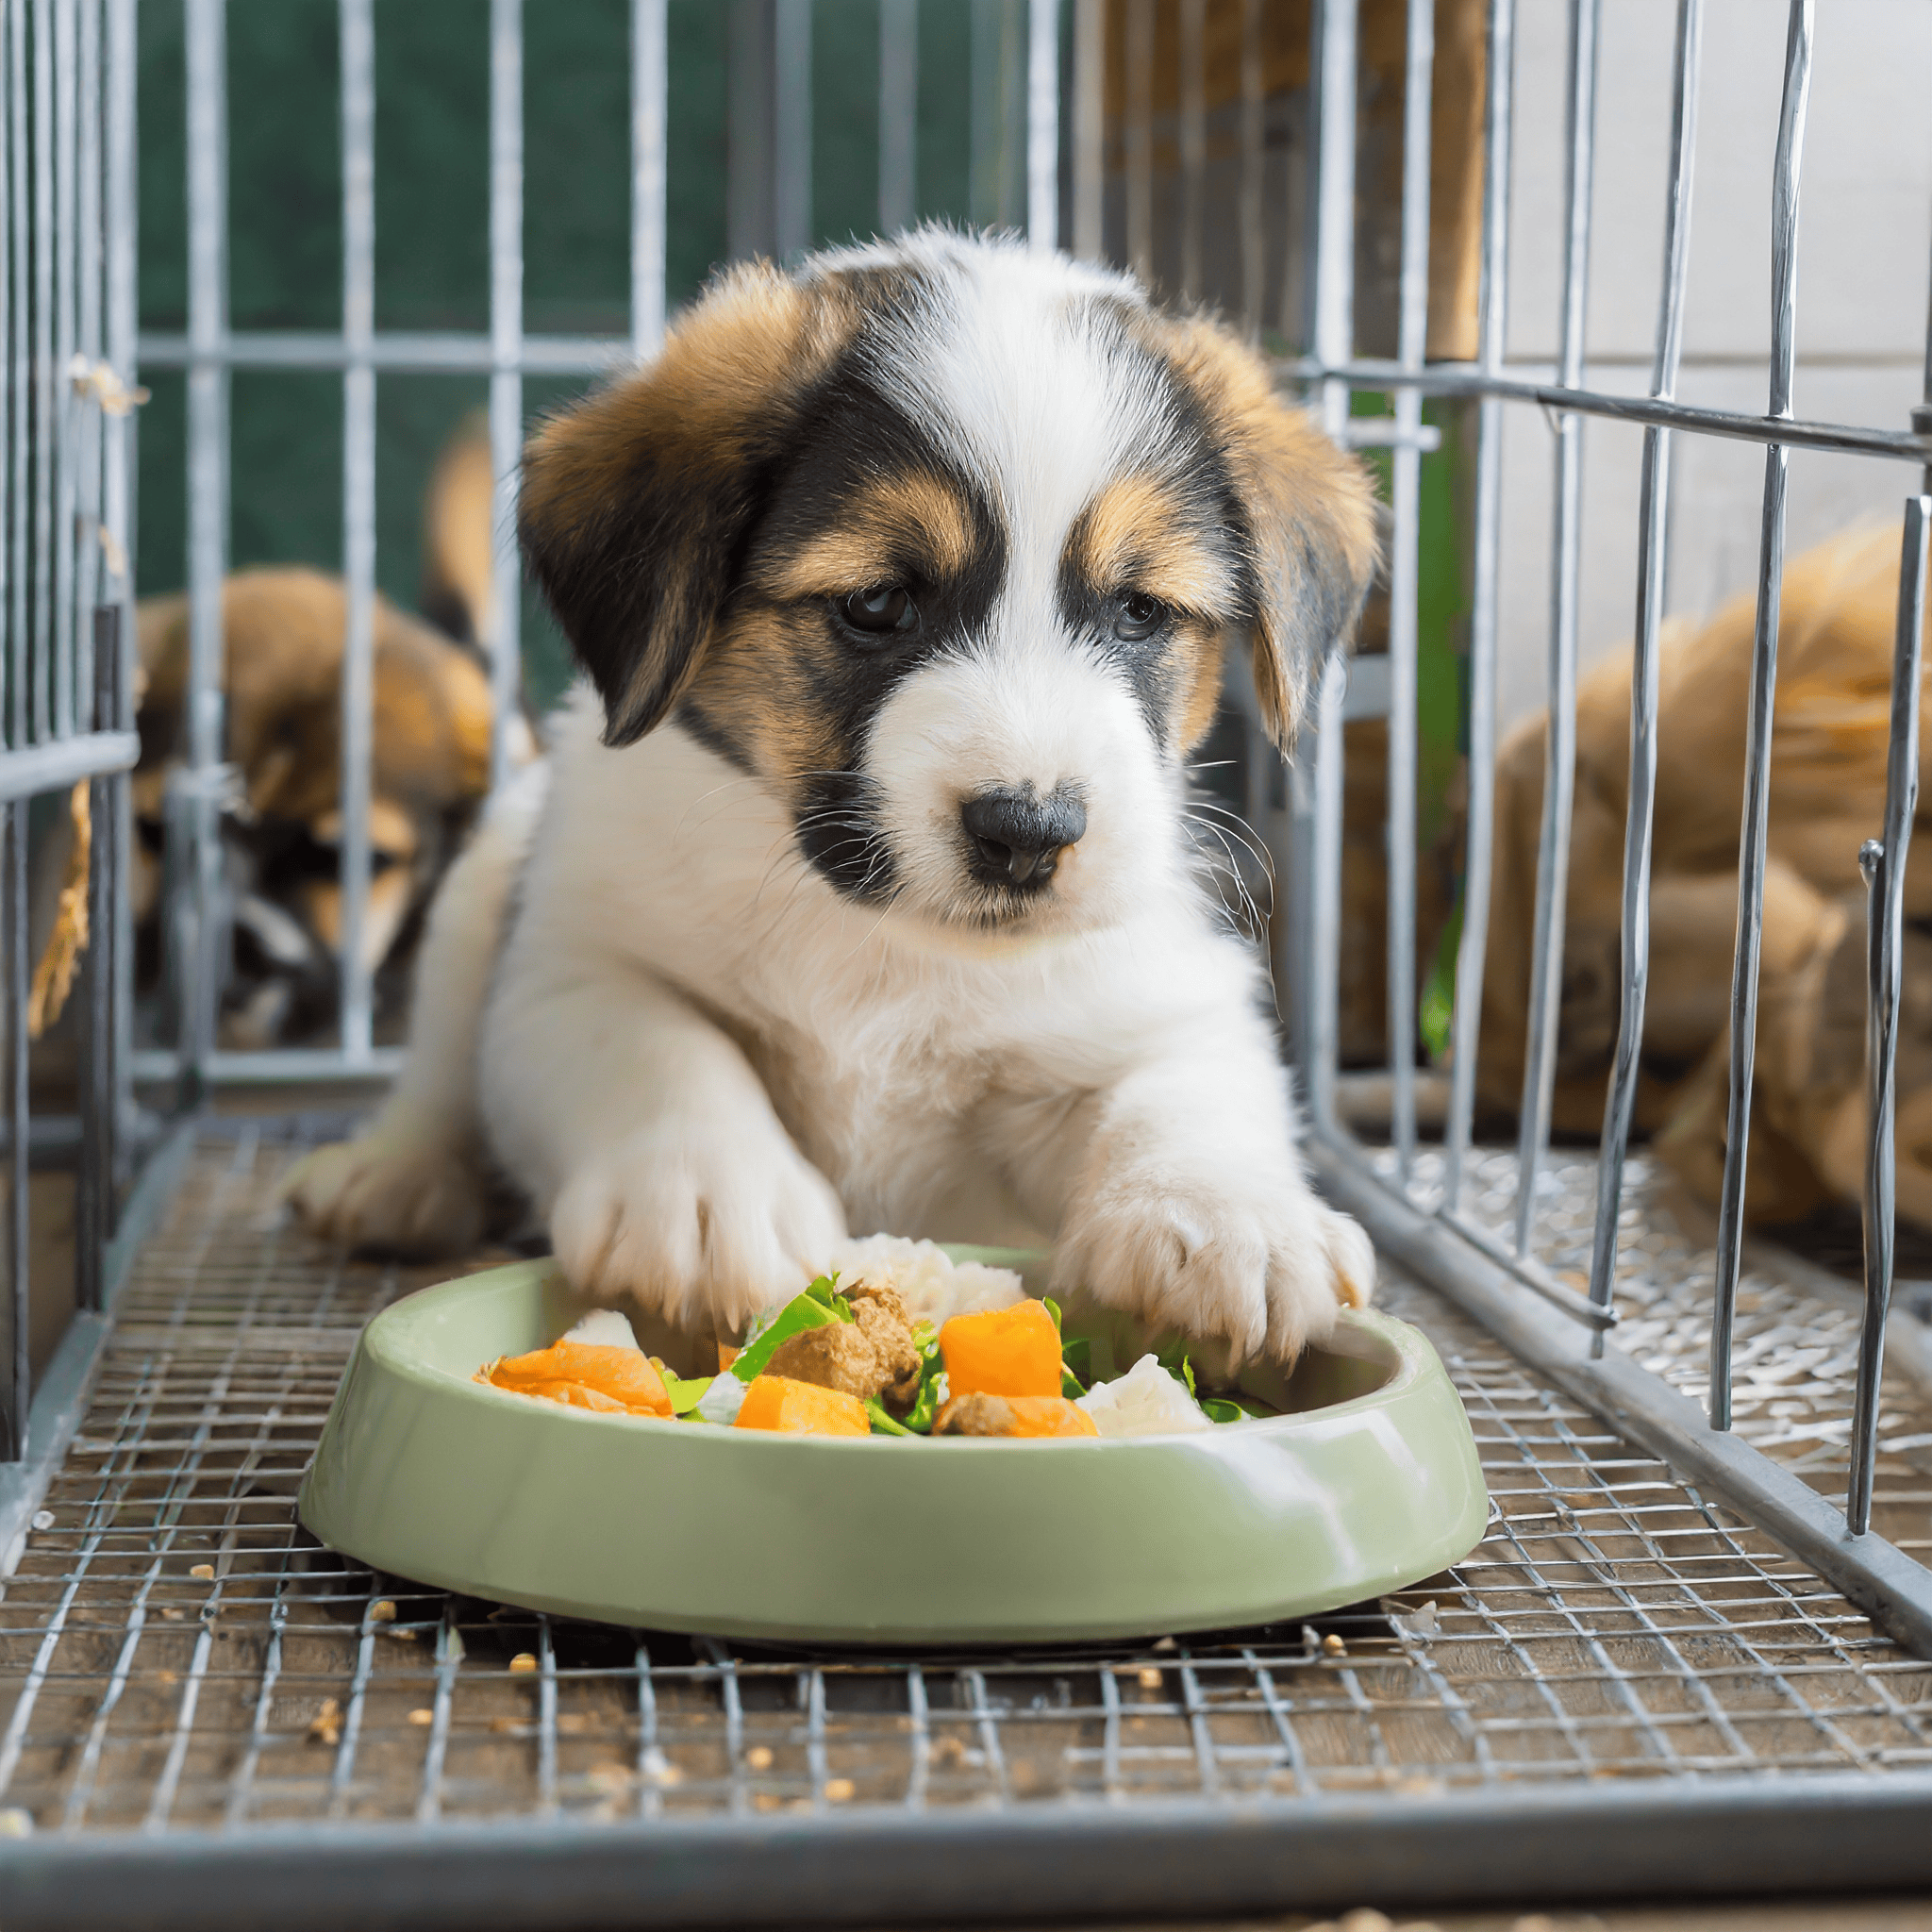 You might feed your puppy her meals in the crate or puppy pen. This helps with crate training by creating a positive association between mealtime and crate time..